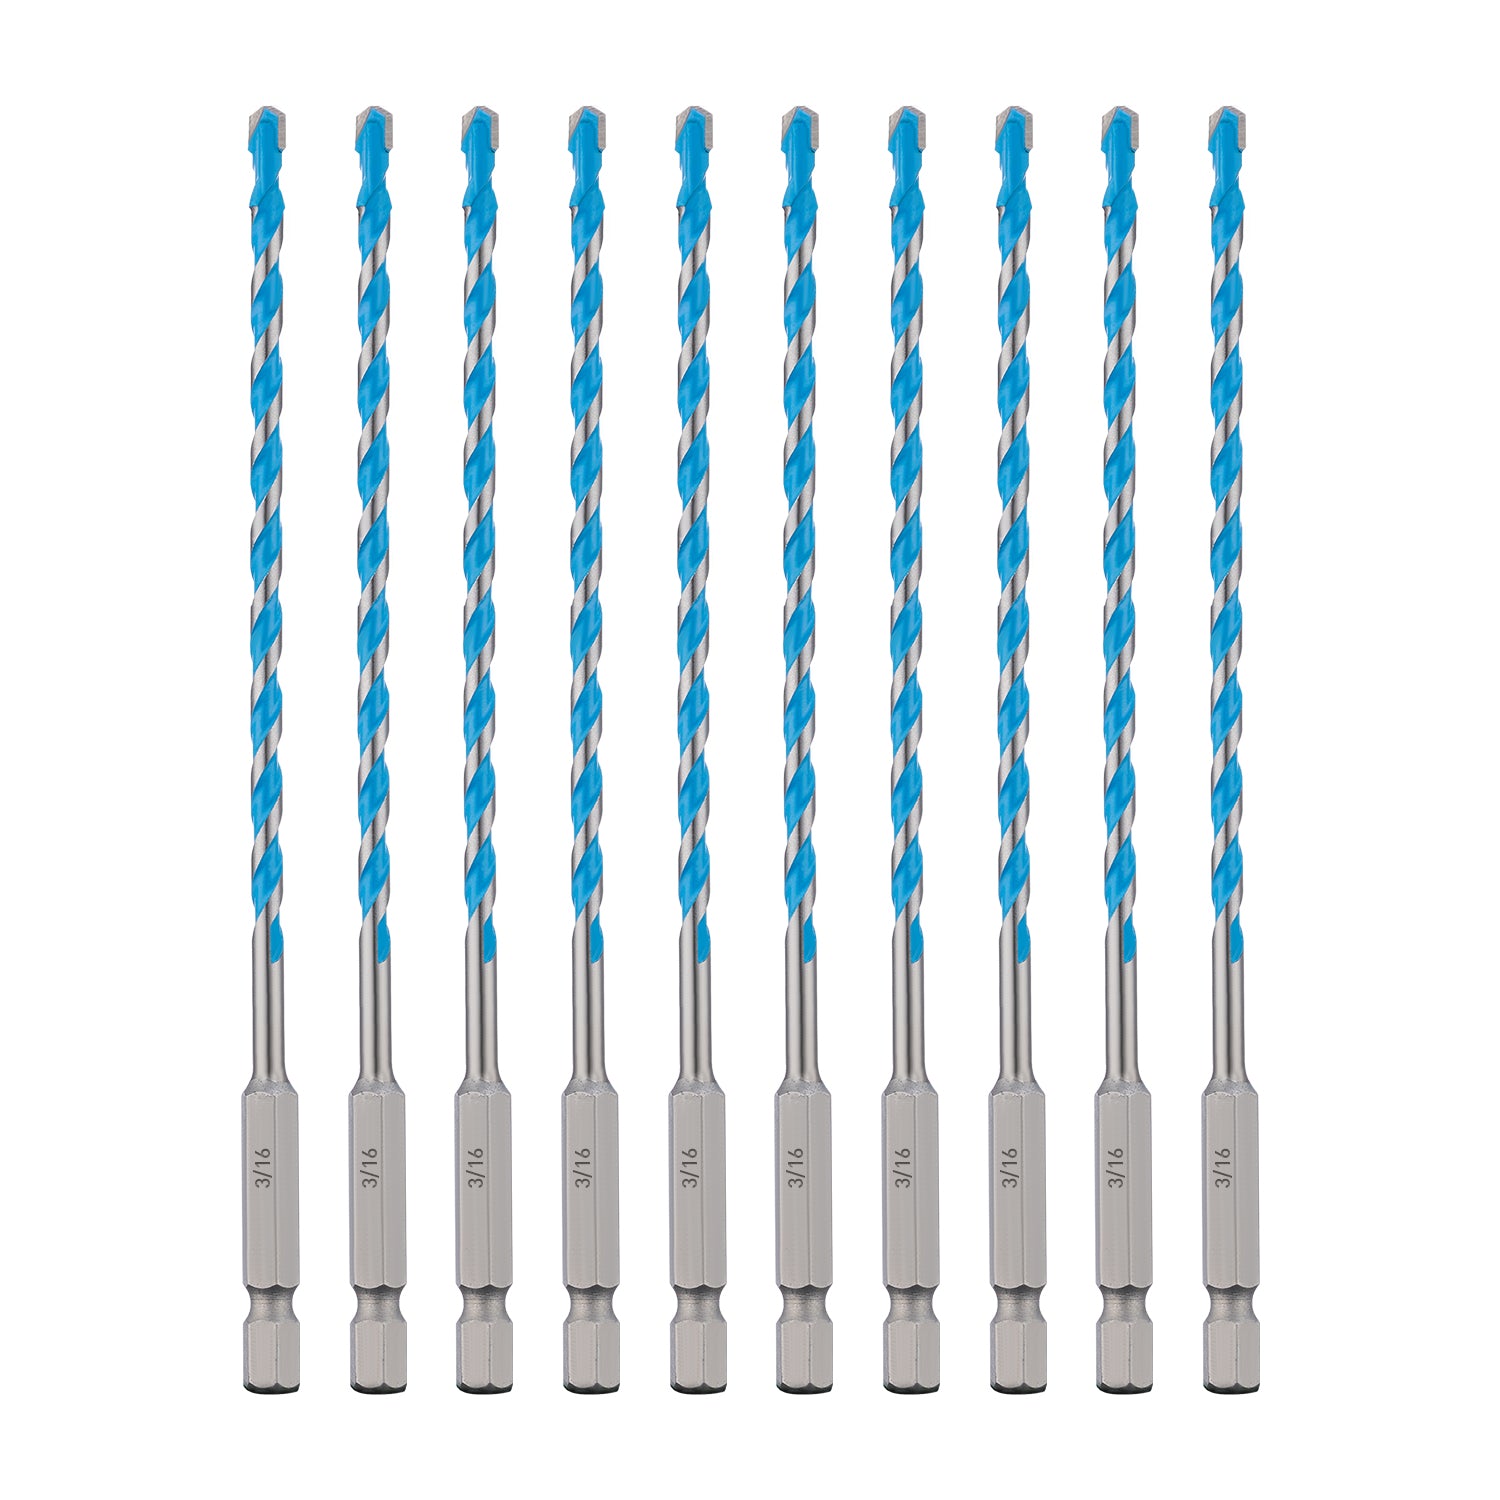 Carbide Tipped Masonry Hammer Drill Bit Sets with Shockproof Hex Shank